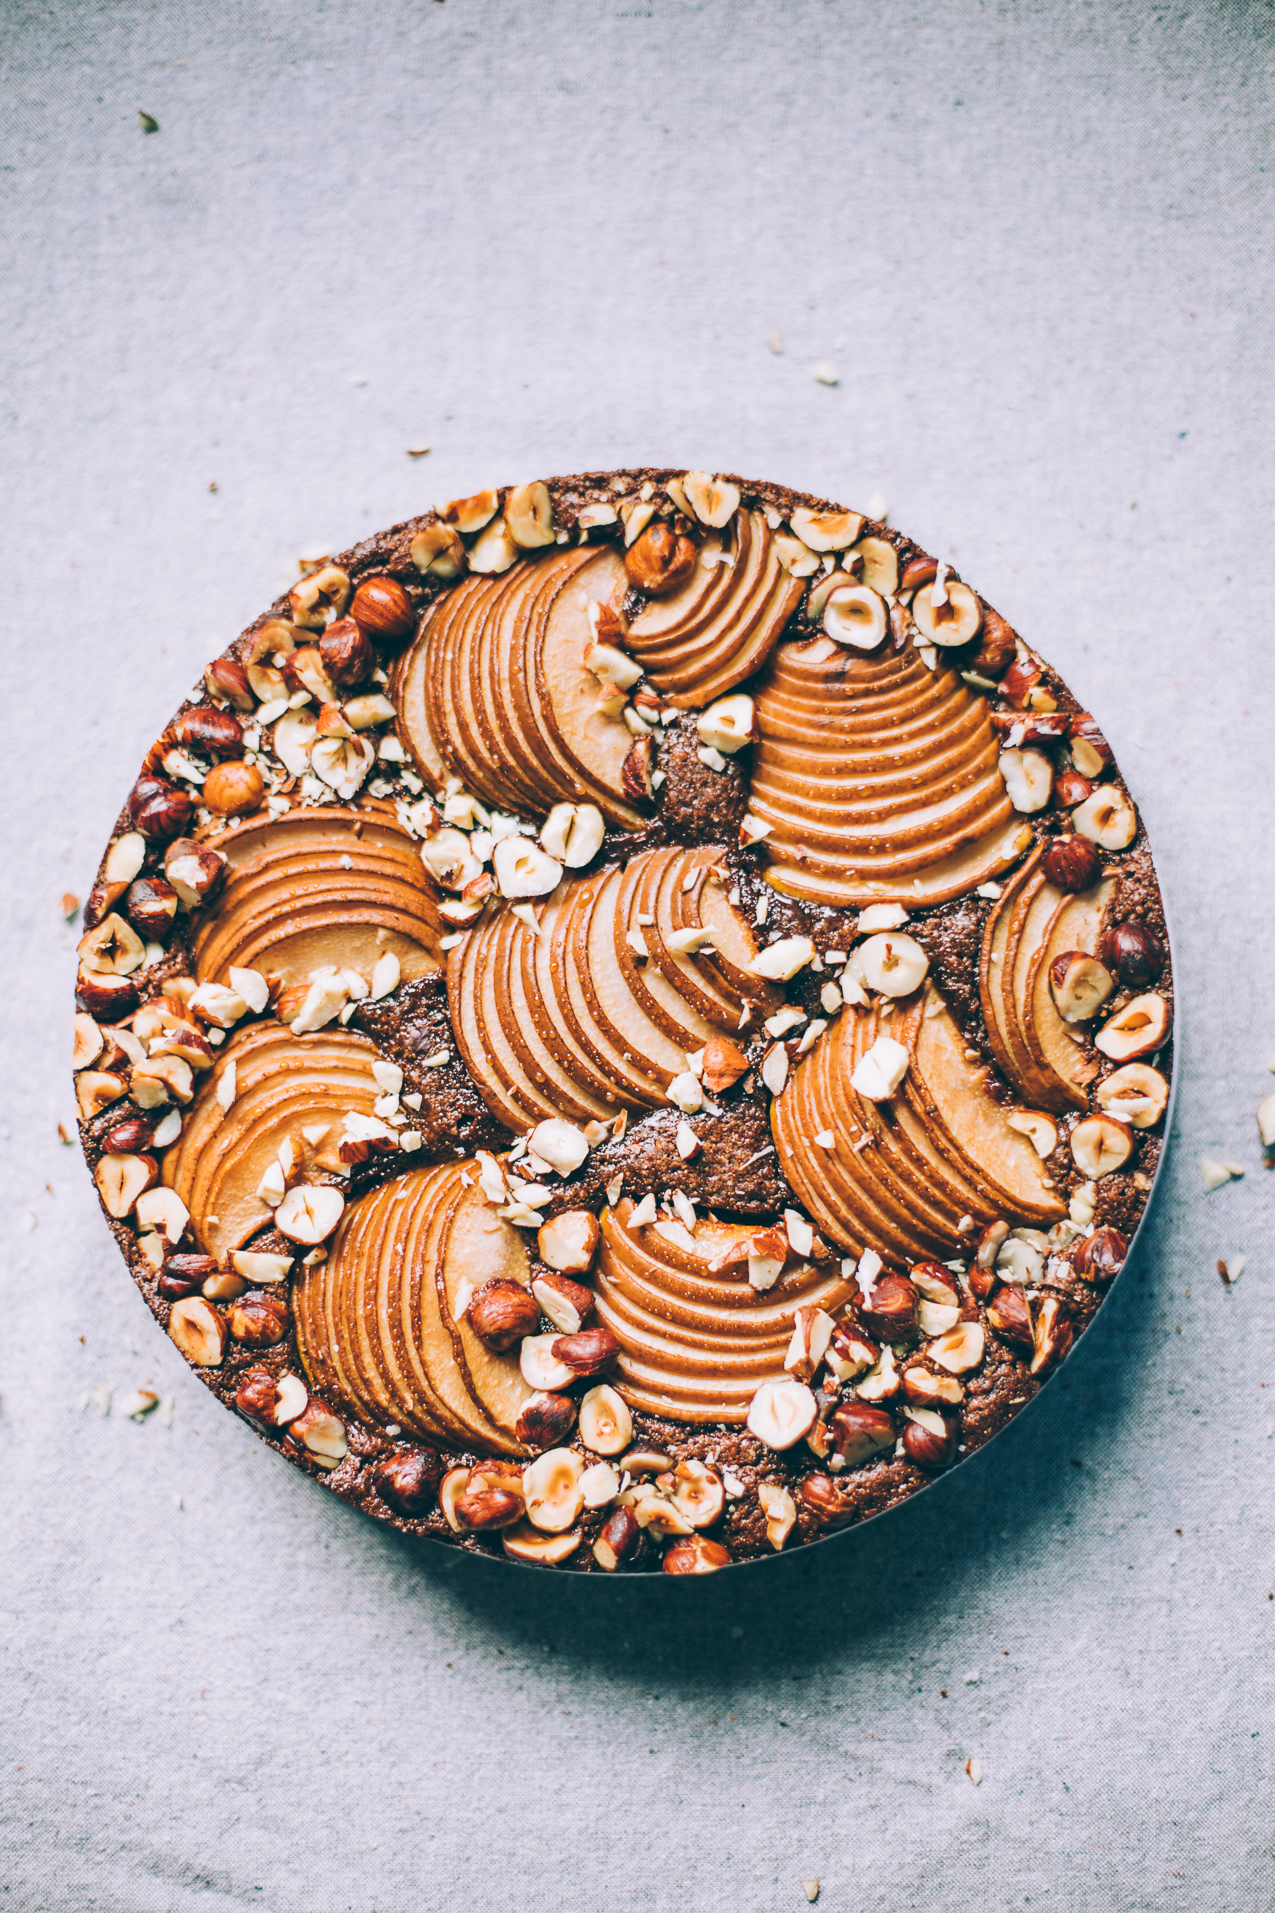 Flourless Chocolate Olive Oil Cake with Cardamom, Pears and Hazelnuts — Will Frolic for Food